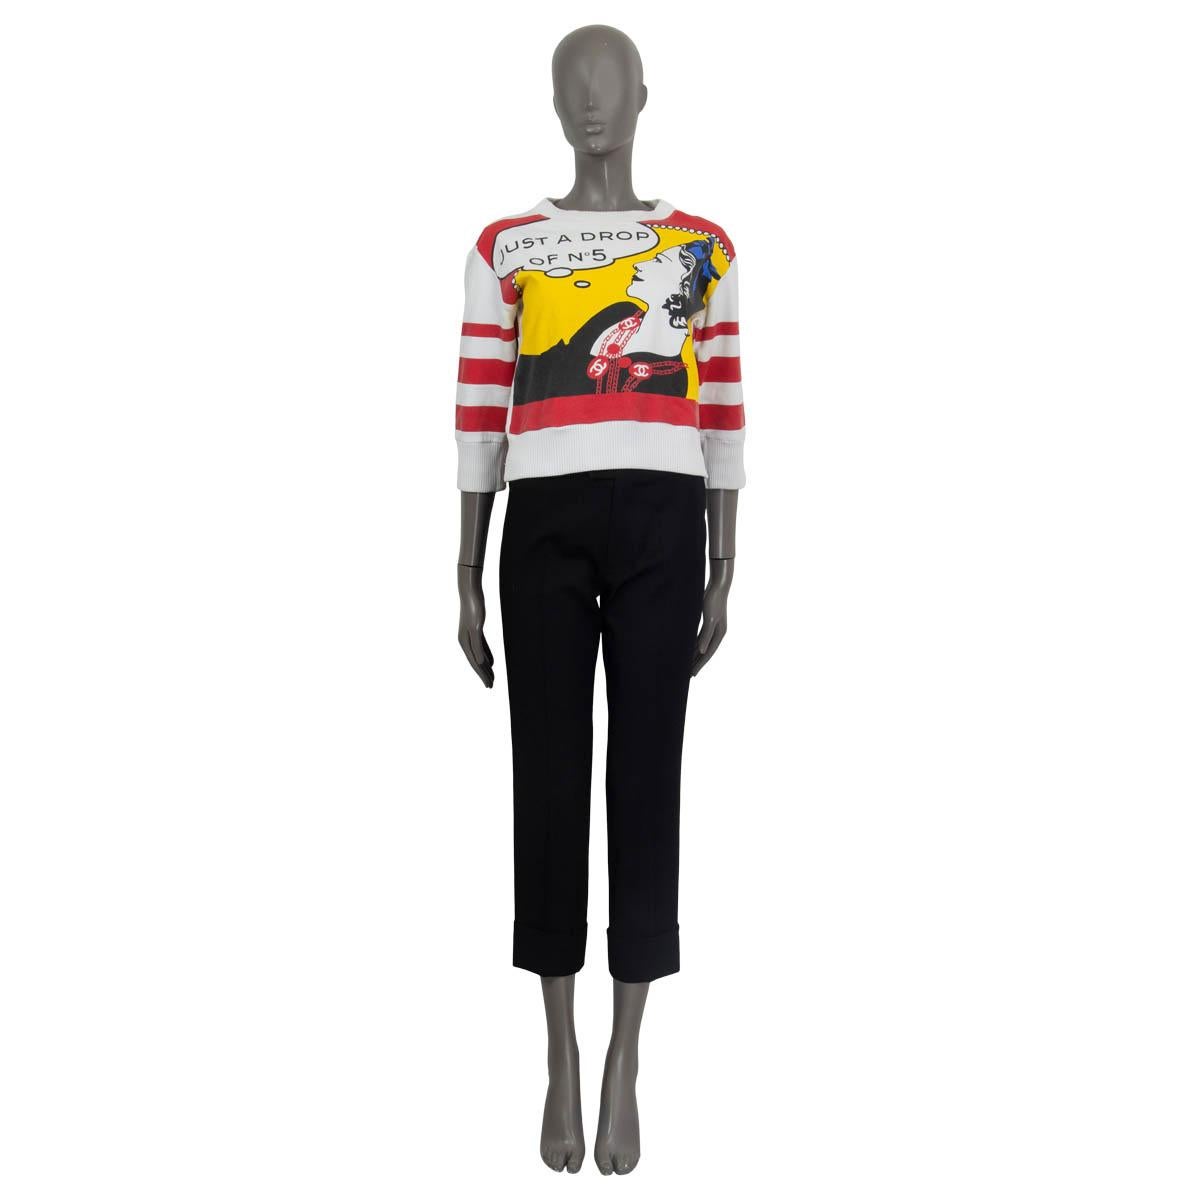 100% authentic Chanel vintage 2001 'Just a Drop of No 5' sweater in red, white, yellow, black and blue cotton (80%) and acrylic (20%). Features ribbed cuffs, round neck and a ribbed hemline. Has been worn and colour is faided, otherwise in excellent